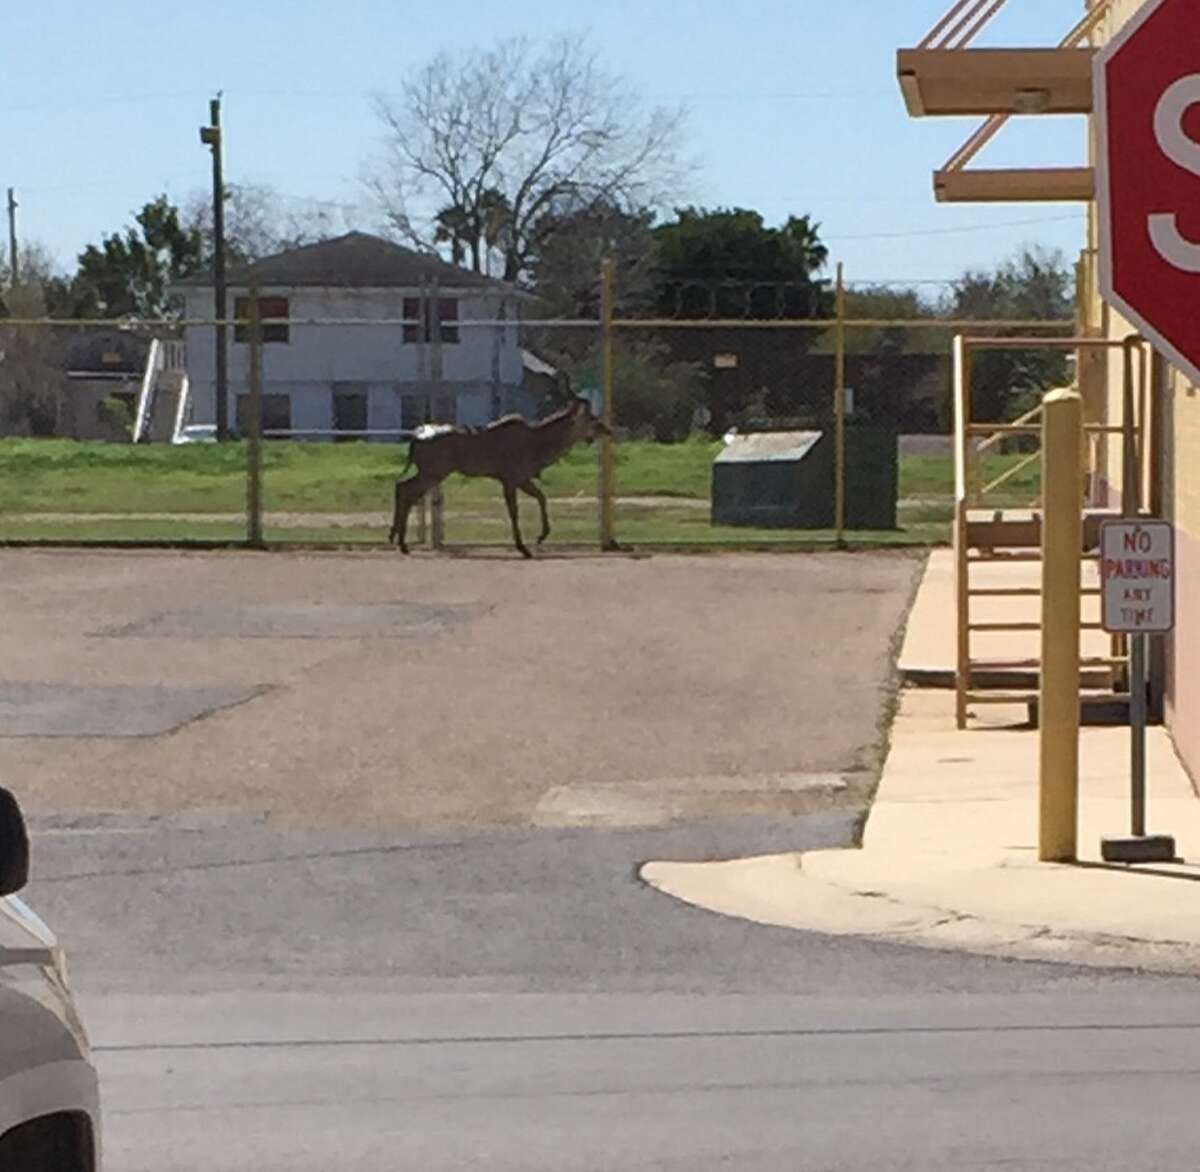 An antelope residing in the Brownsville Gladys Porter Zoo escaped during an attempted transfer and led authorities on a chase through downtown Brownsville on February 18, 2015.